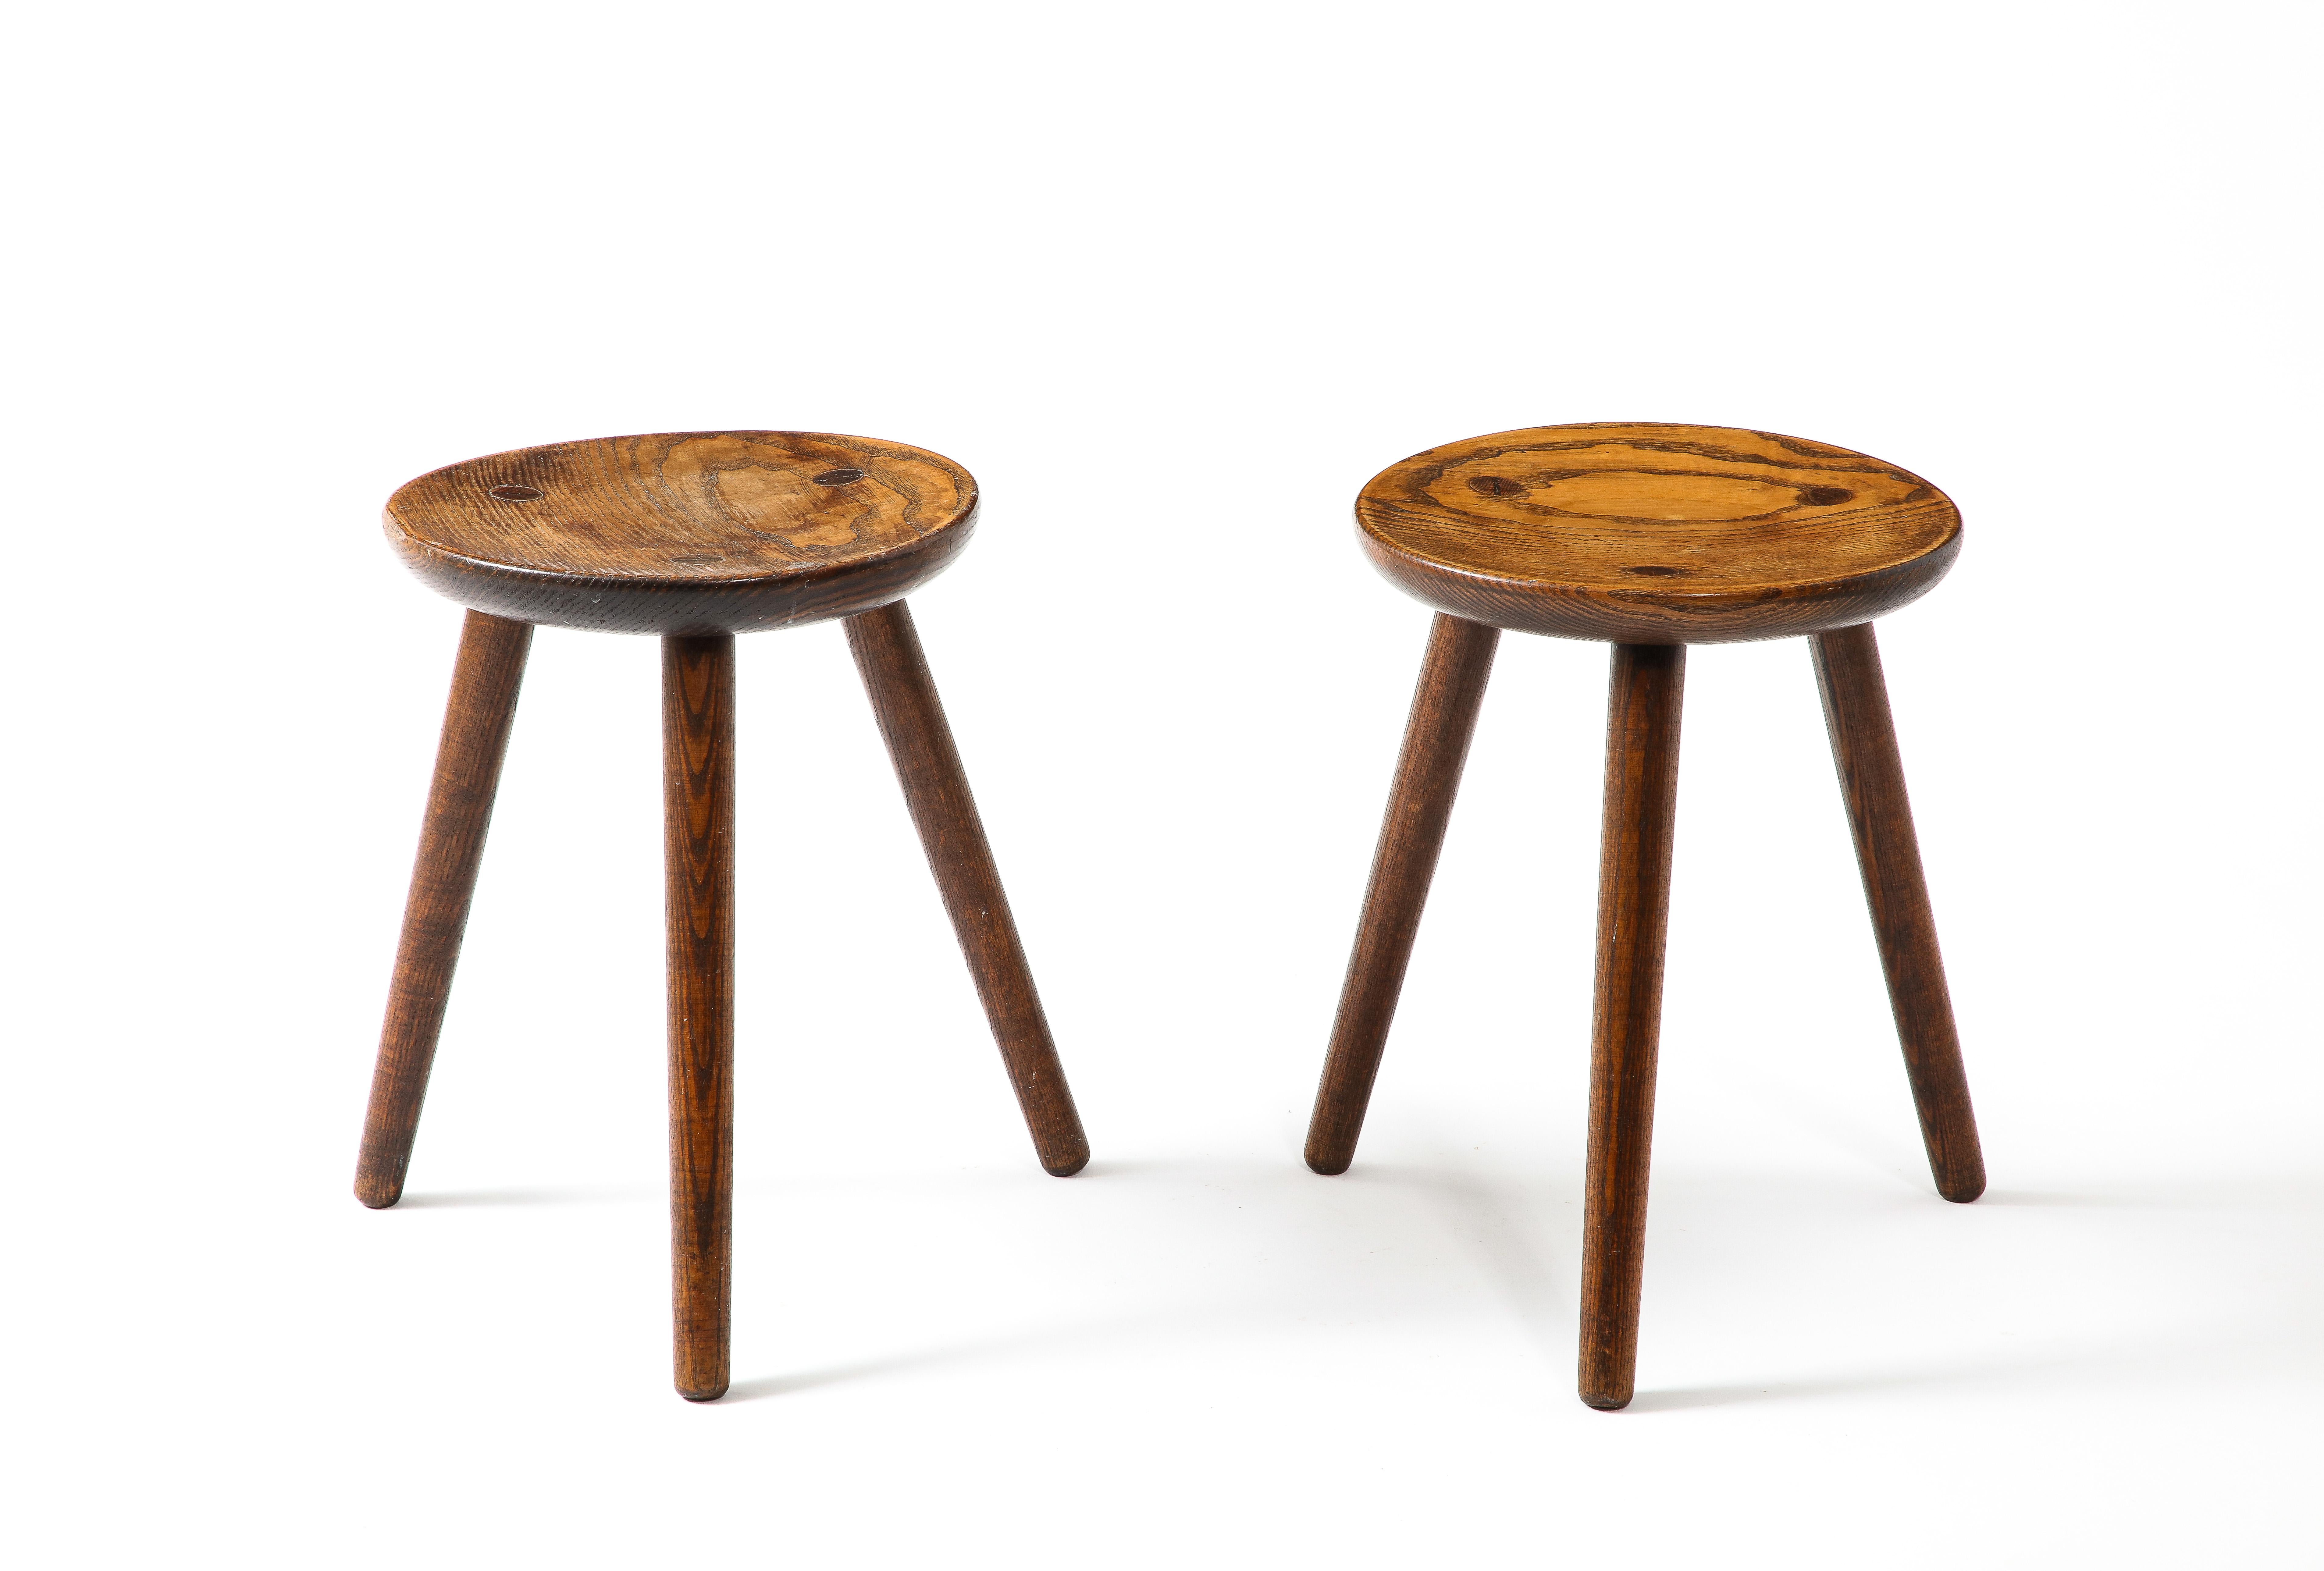 Pair of Tripod Stools in the Manner of Perriand, France 1950s For Sale 1